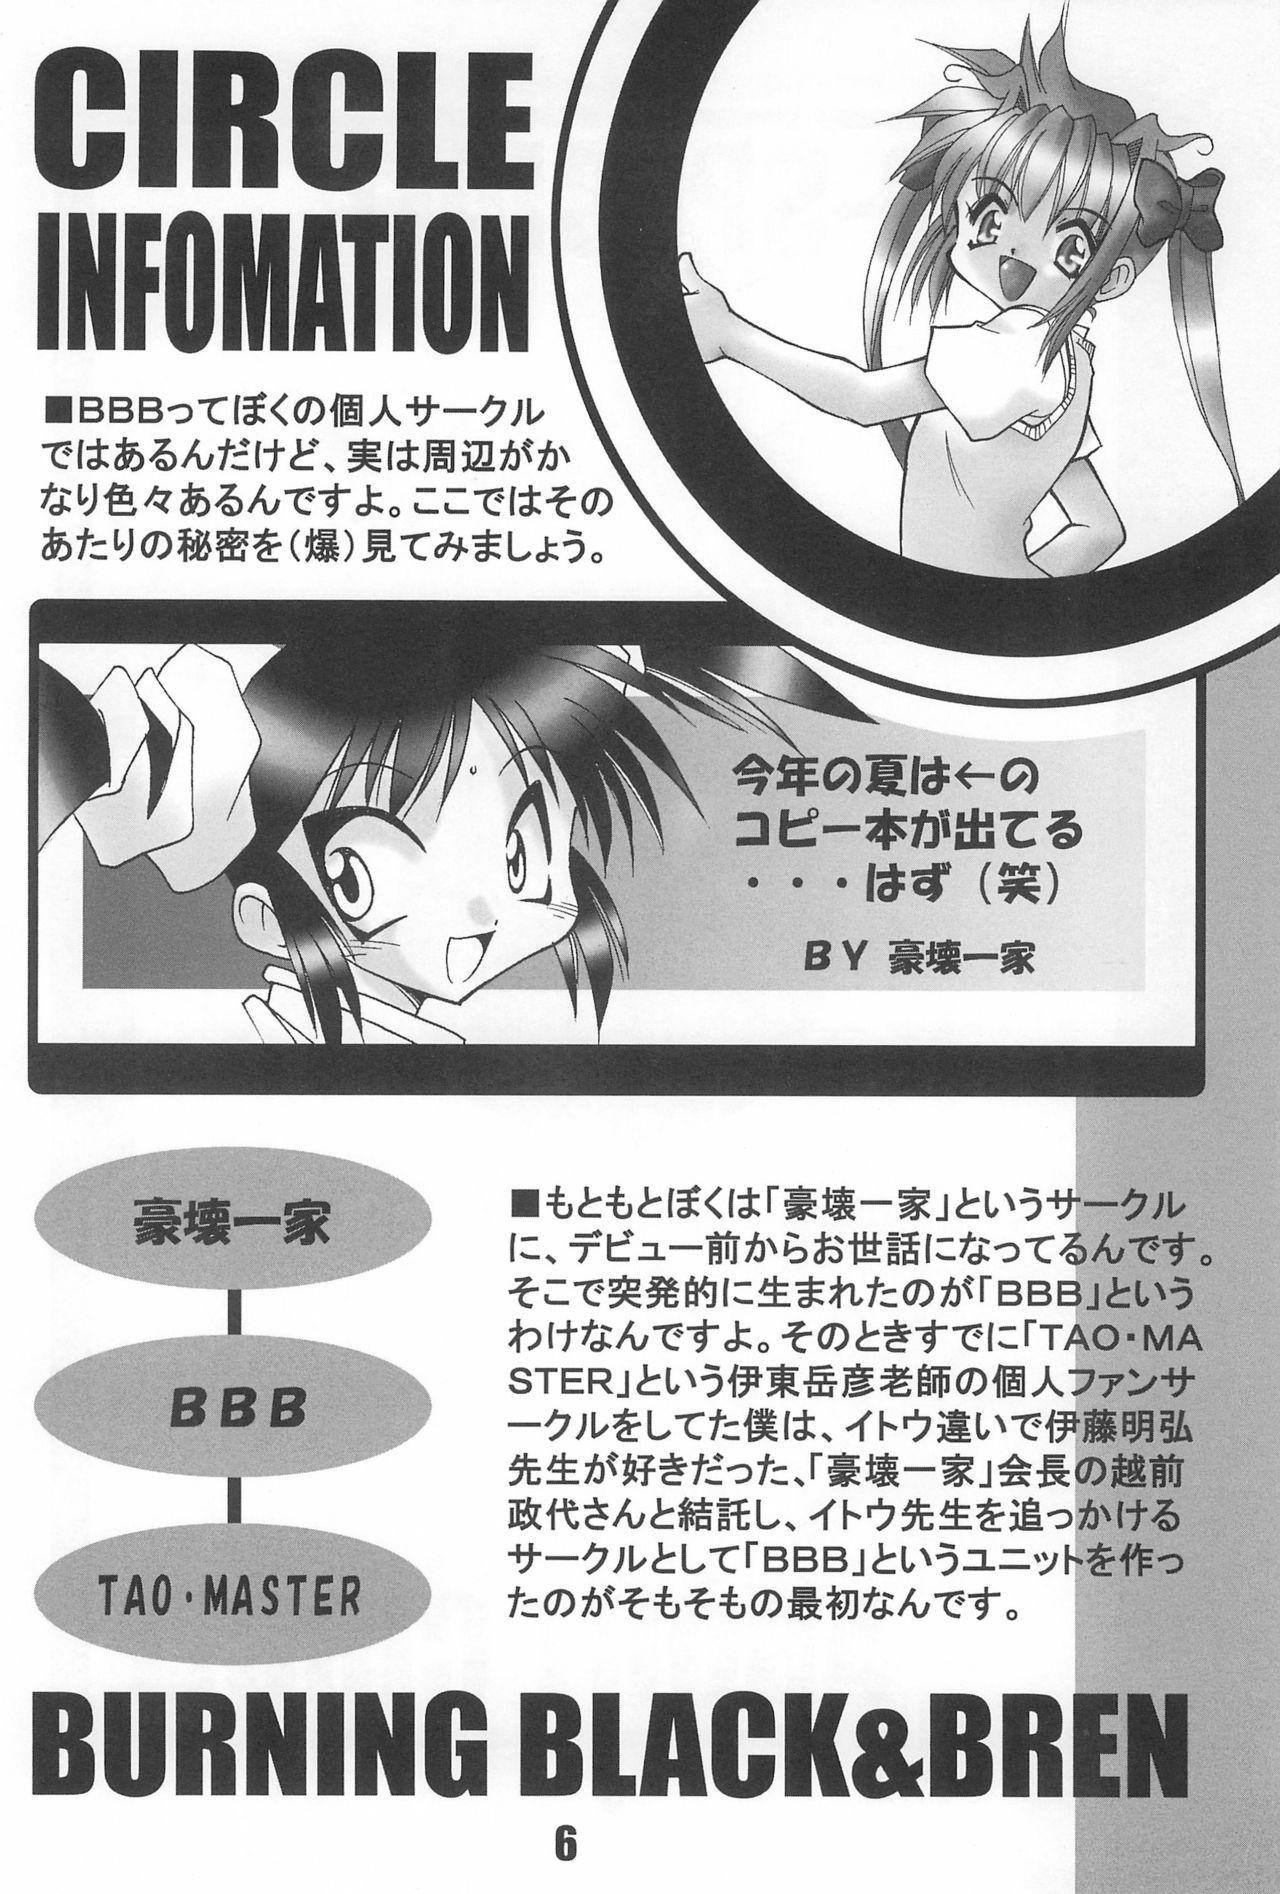 Swingers BBB OFFICIAL GUIDE BOOK - Cardcaptor sakura Amatoriale - Page 6